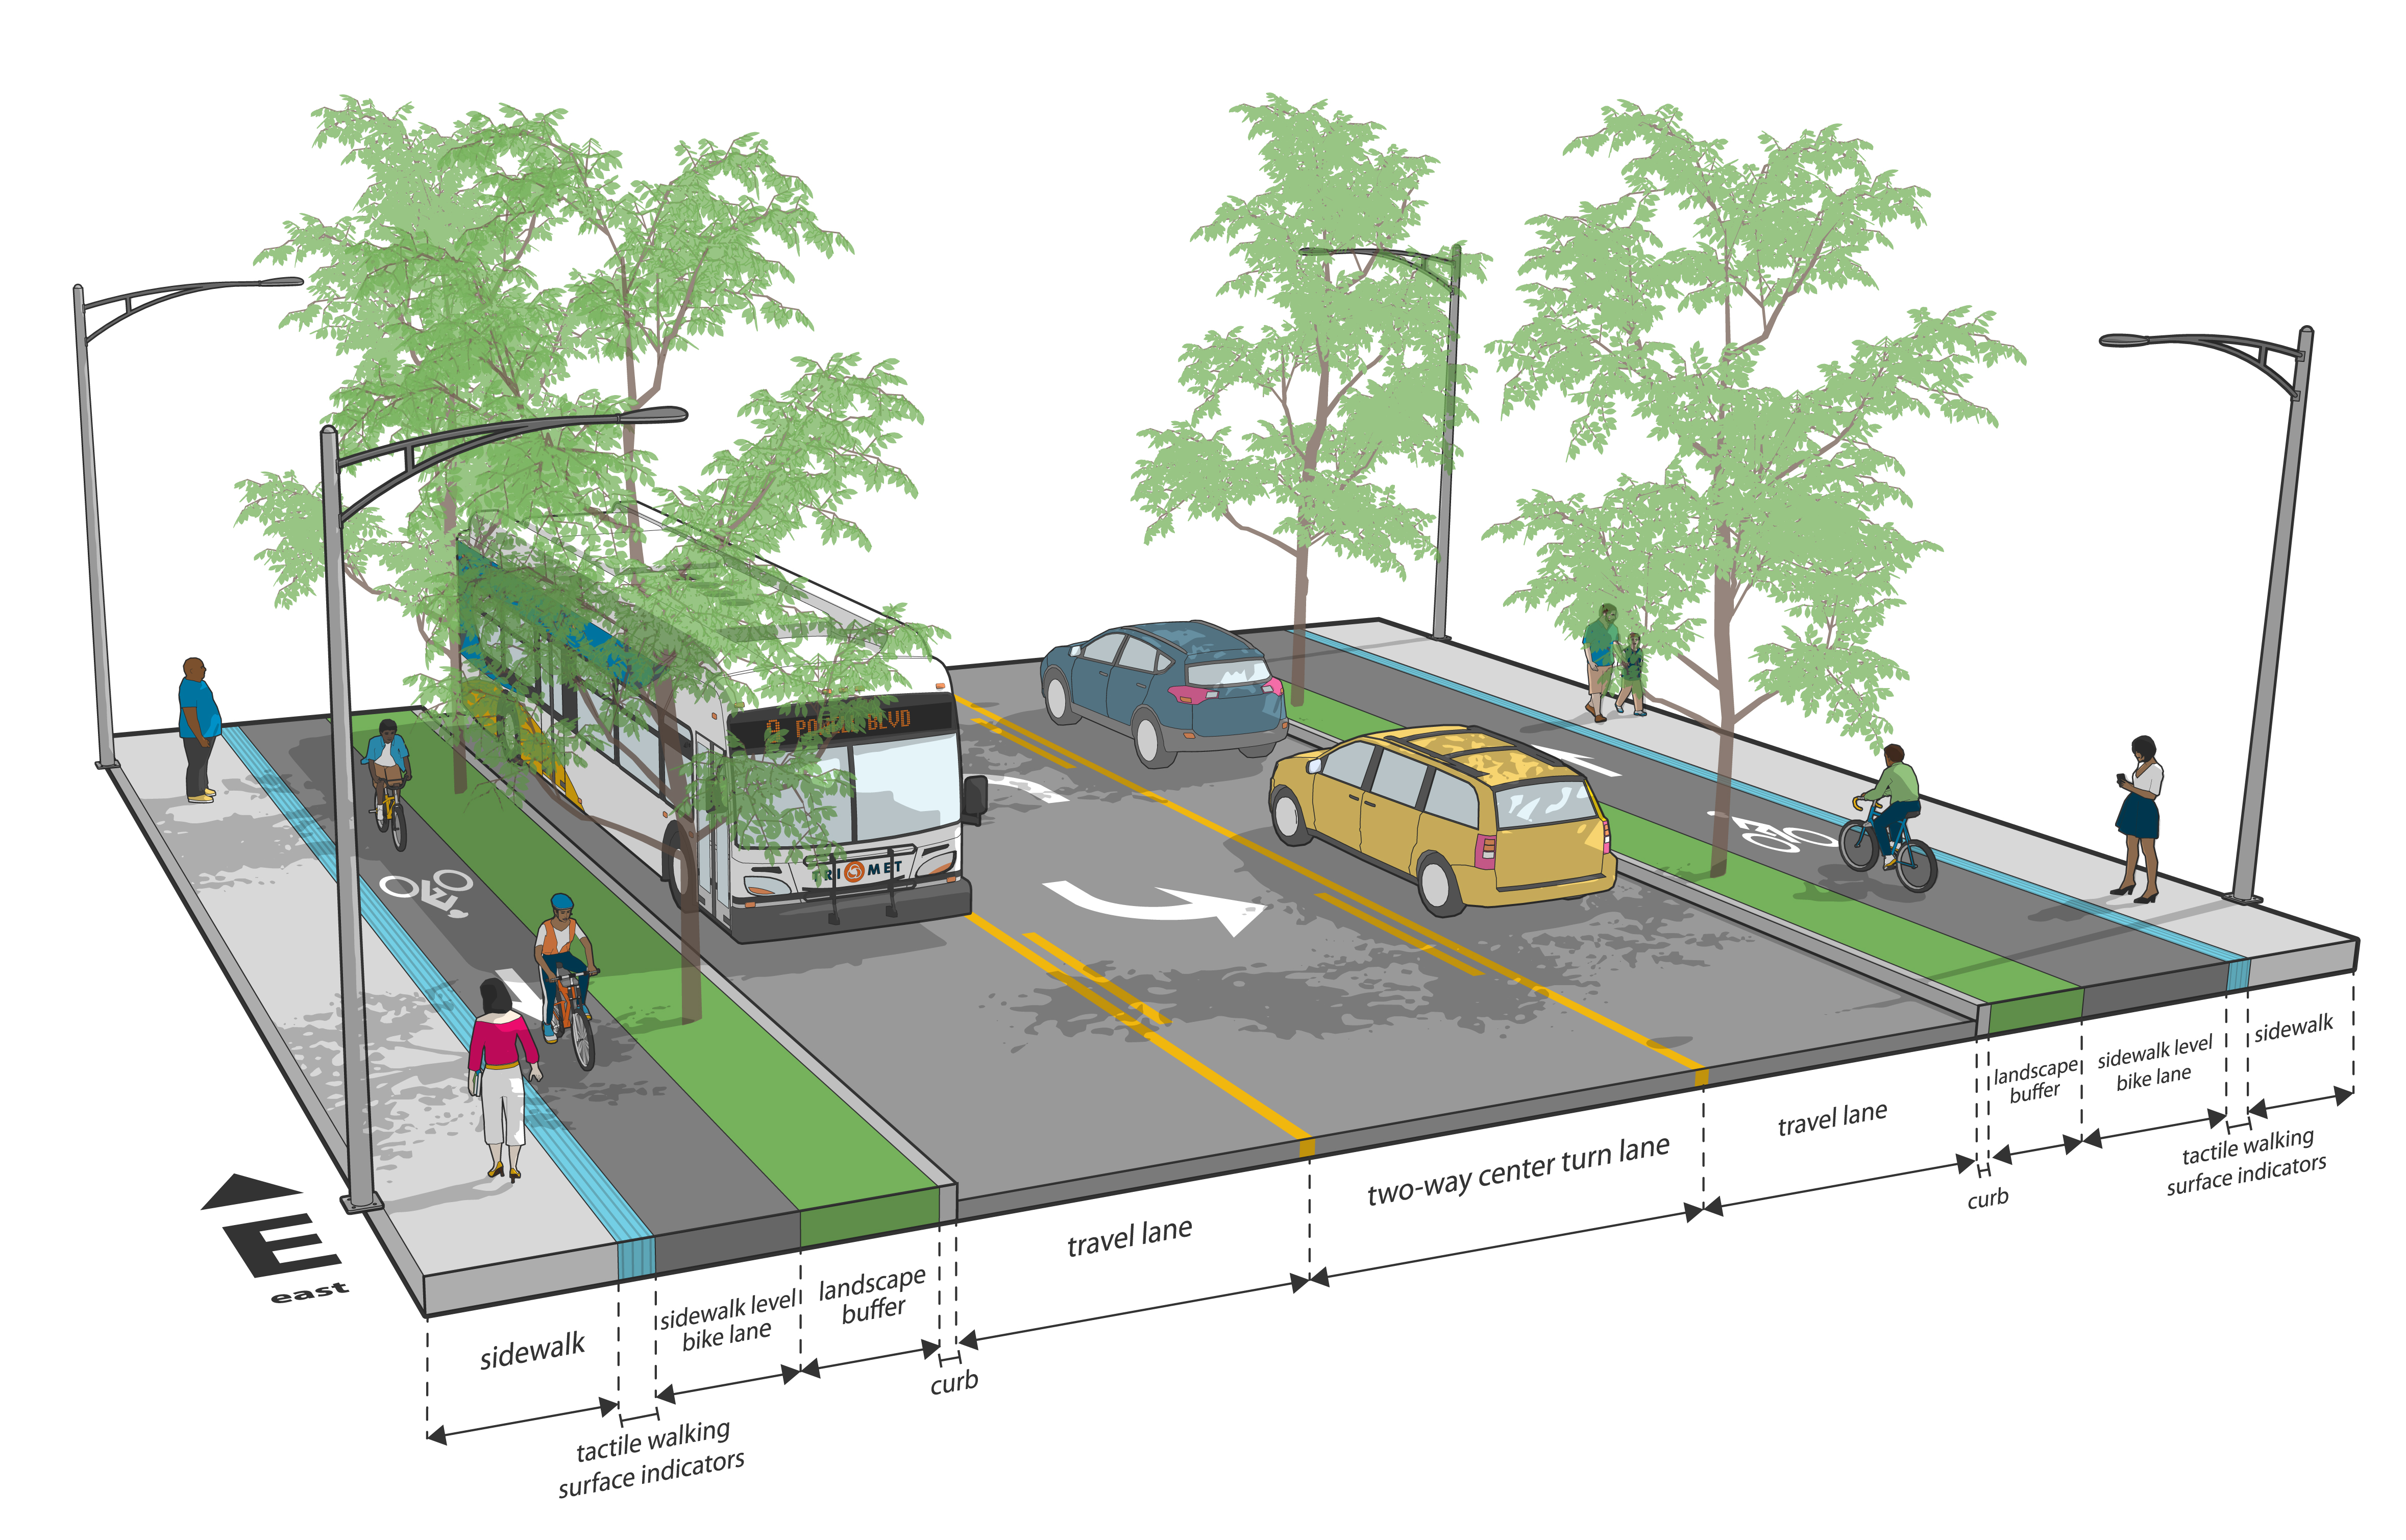 An example cross section showing the new bike lanes, sidewalk and center turn lane that will be built in the Outer Powell projec